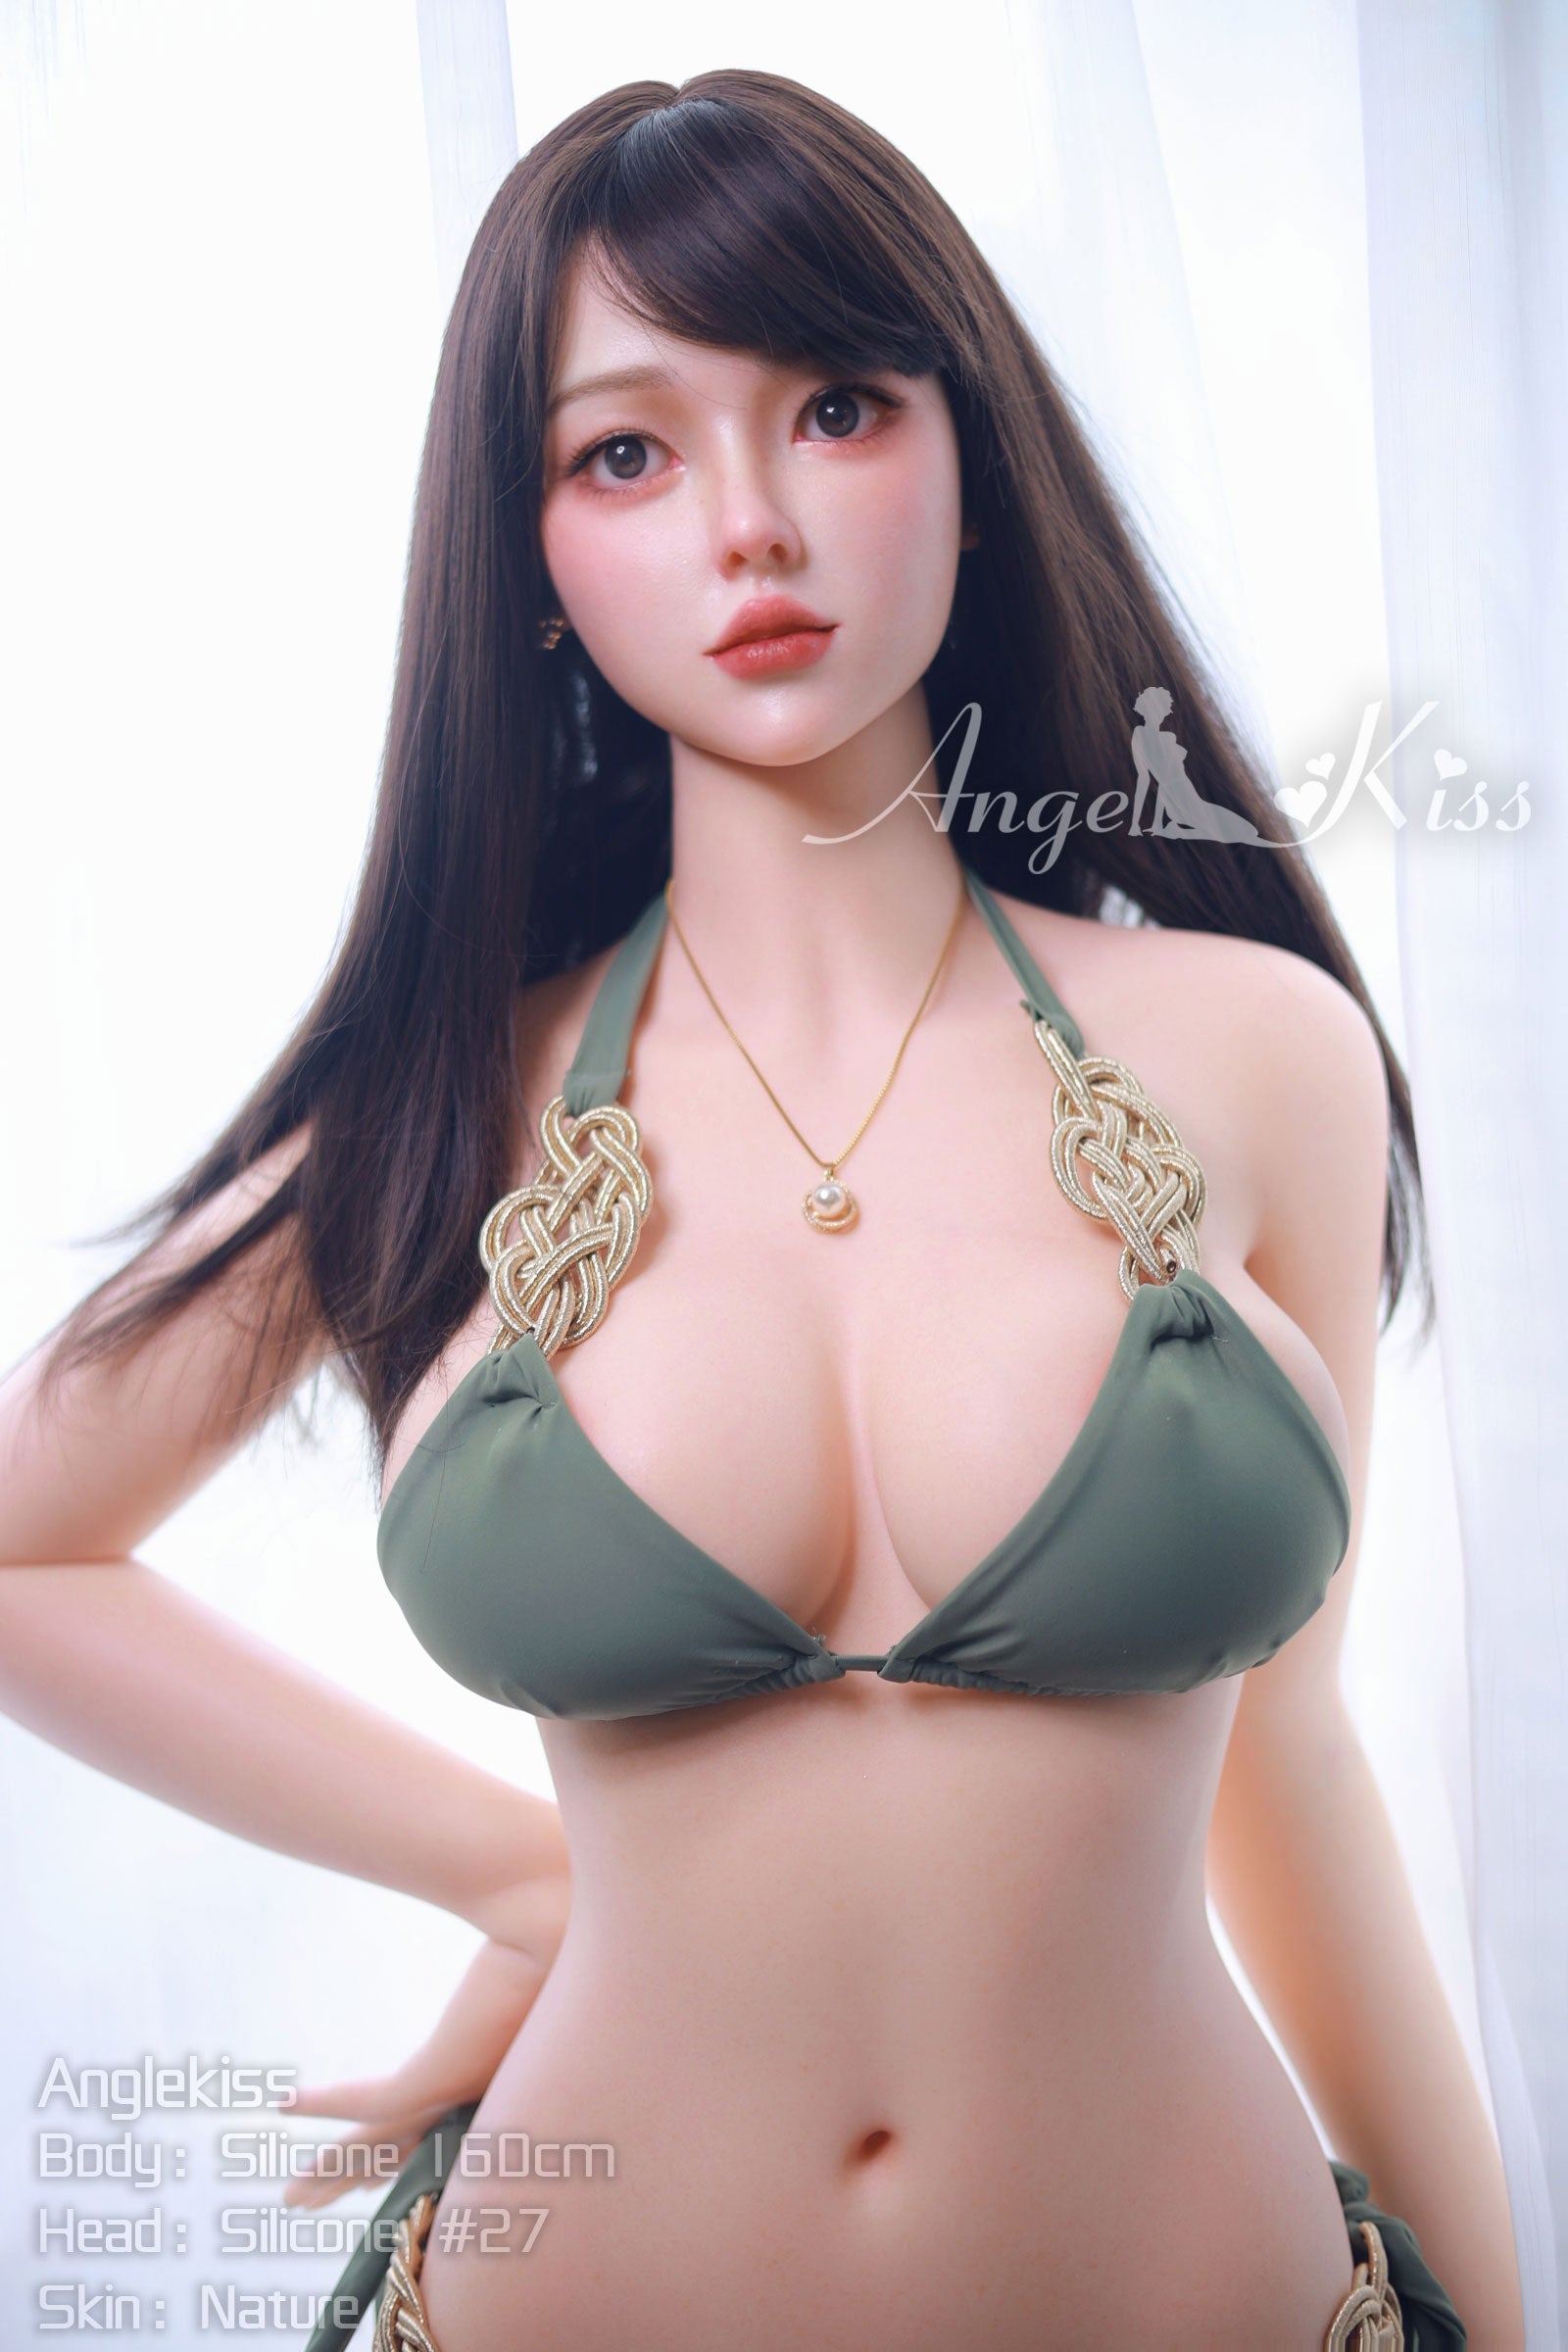 Angelkiss Doll 160 cm Silicone - Aiko | Buy Sex Dolls at DOLLS ACTUALLY